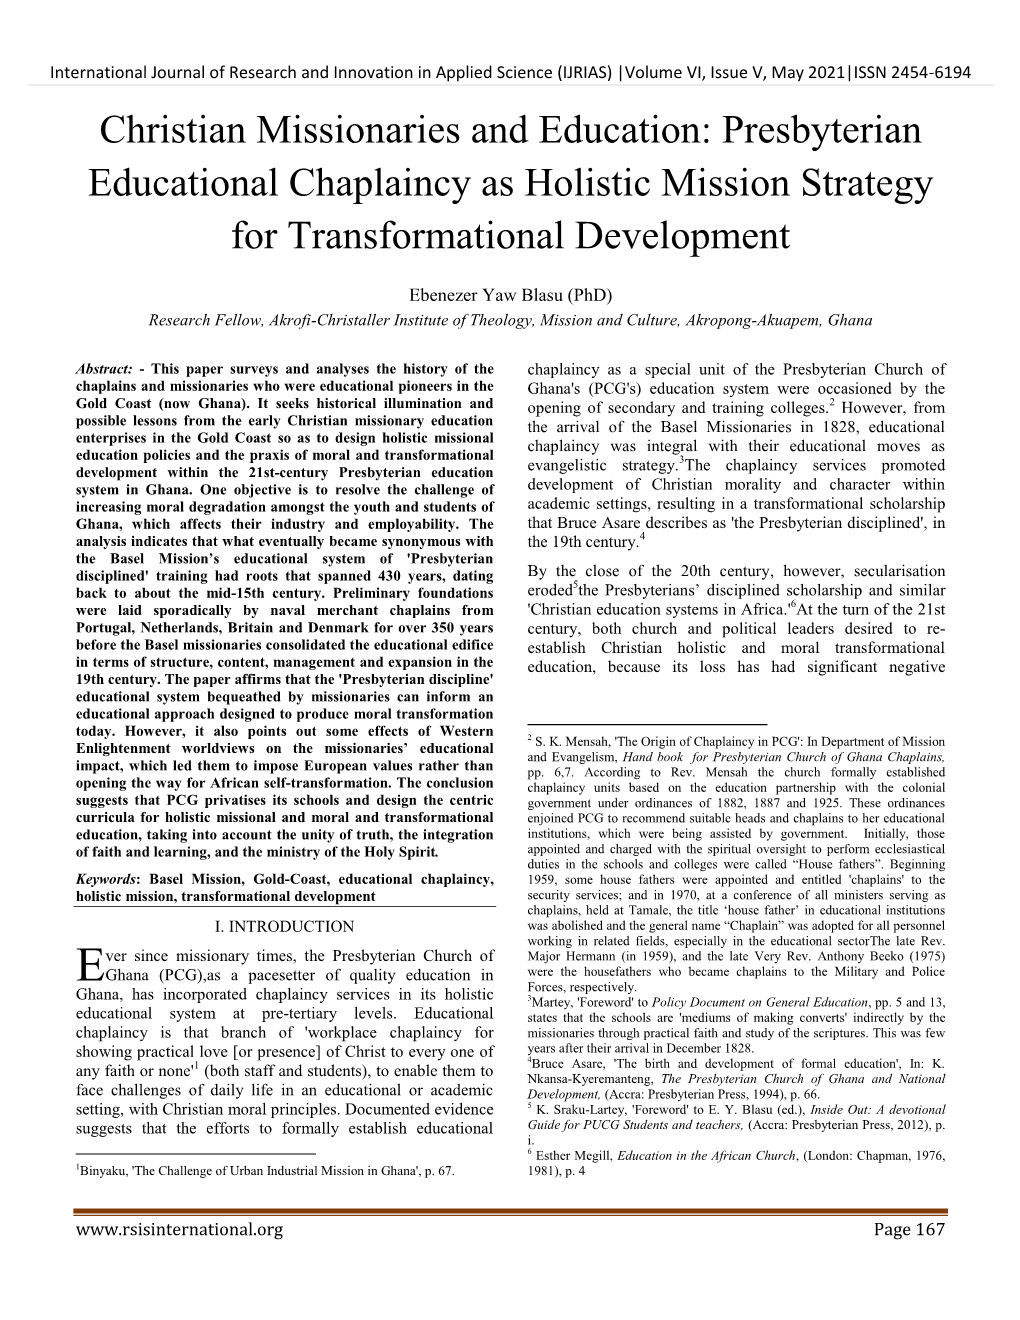 Christian Missionaries and Education: Presbyterian Educational Chaplaincy As Holistic Mission Strategy for Transformational Development